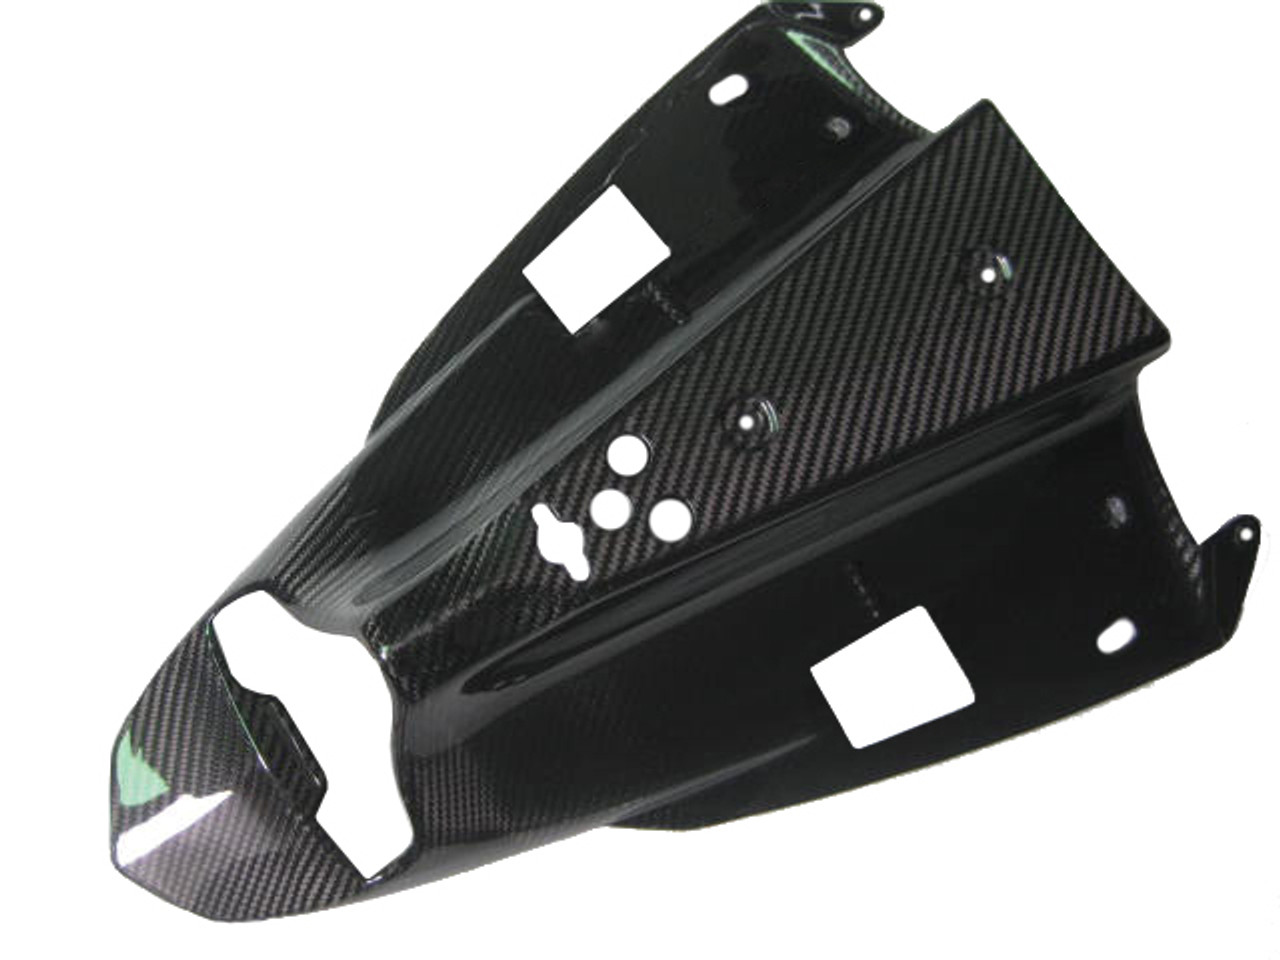 Glossy Twill Weave Carbon Fiber Under Tail for Yamaha R1 09-14